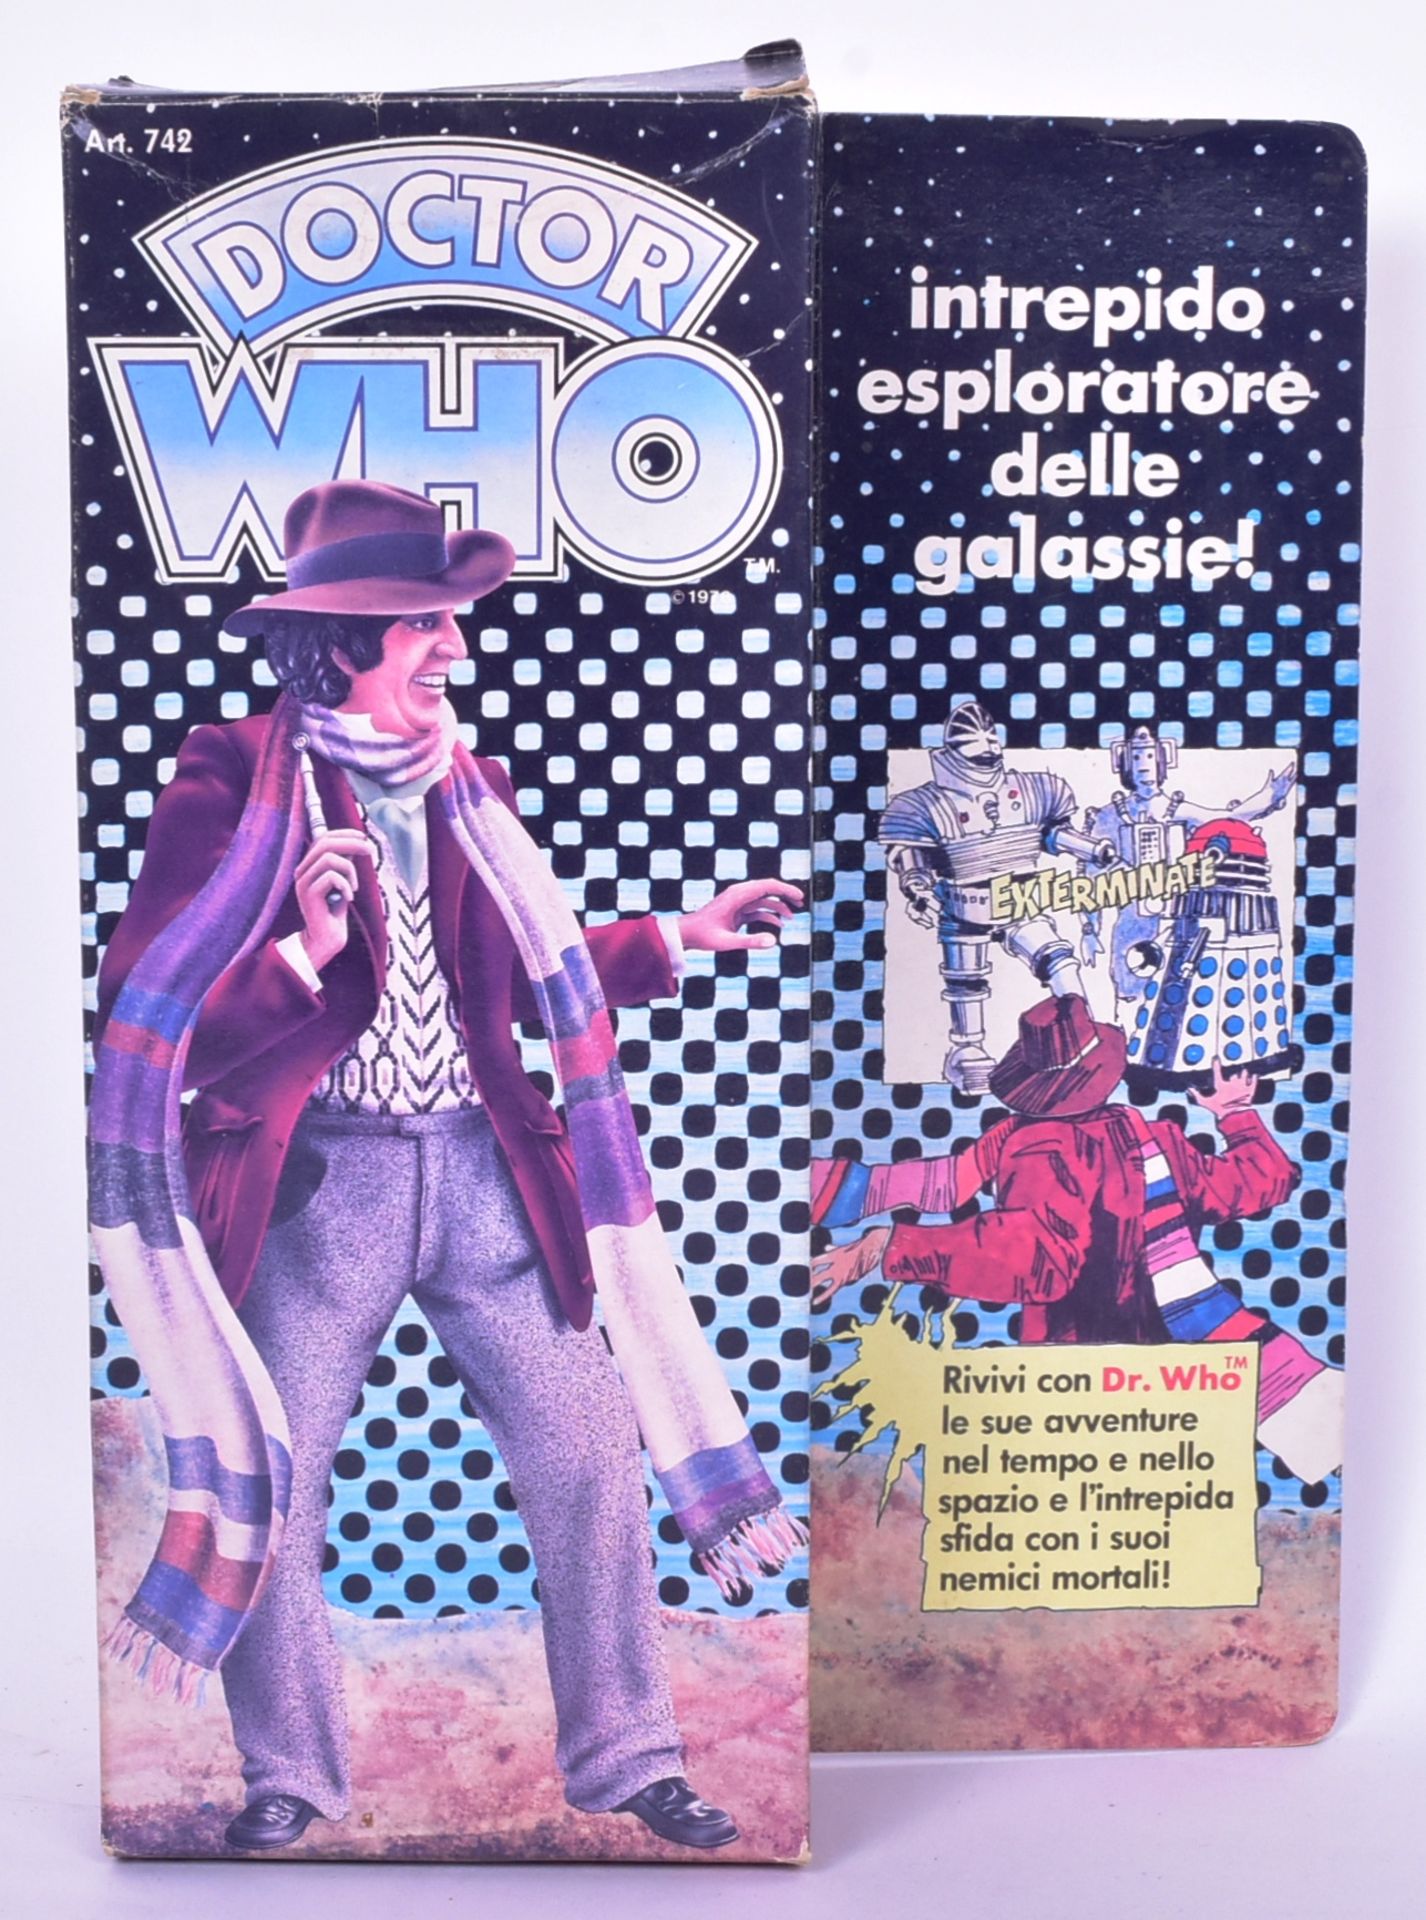 DOCTOR WHO - DENYS FISHER / HARBERT - FOURTH DOCTOR FIGURE - Image 6 of 6